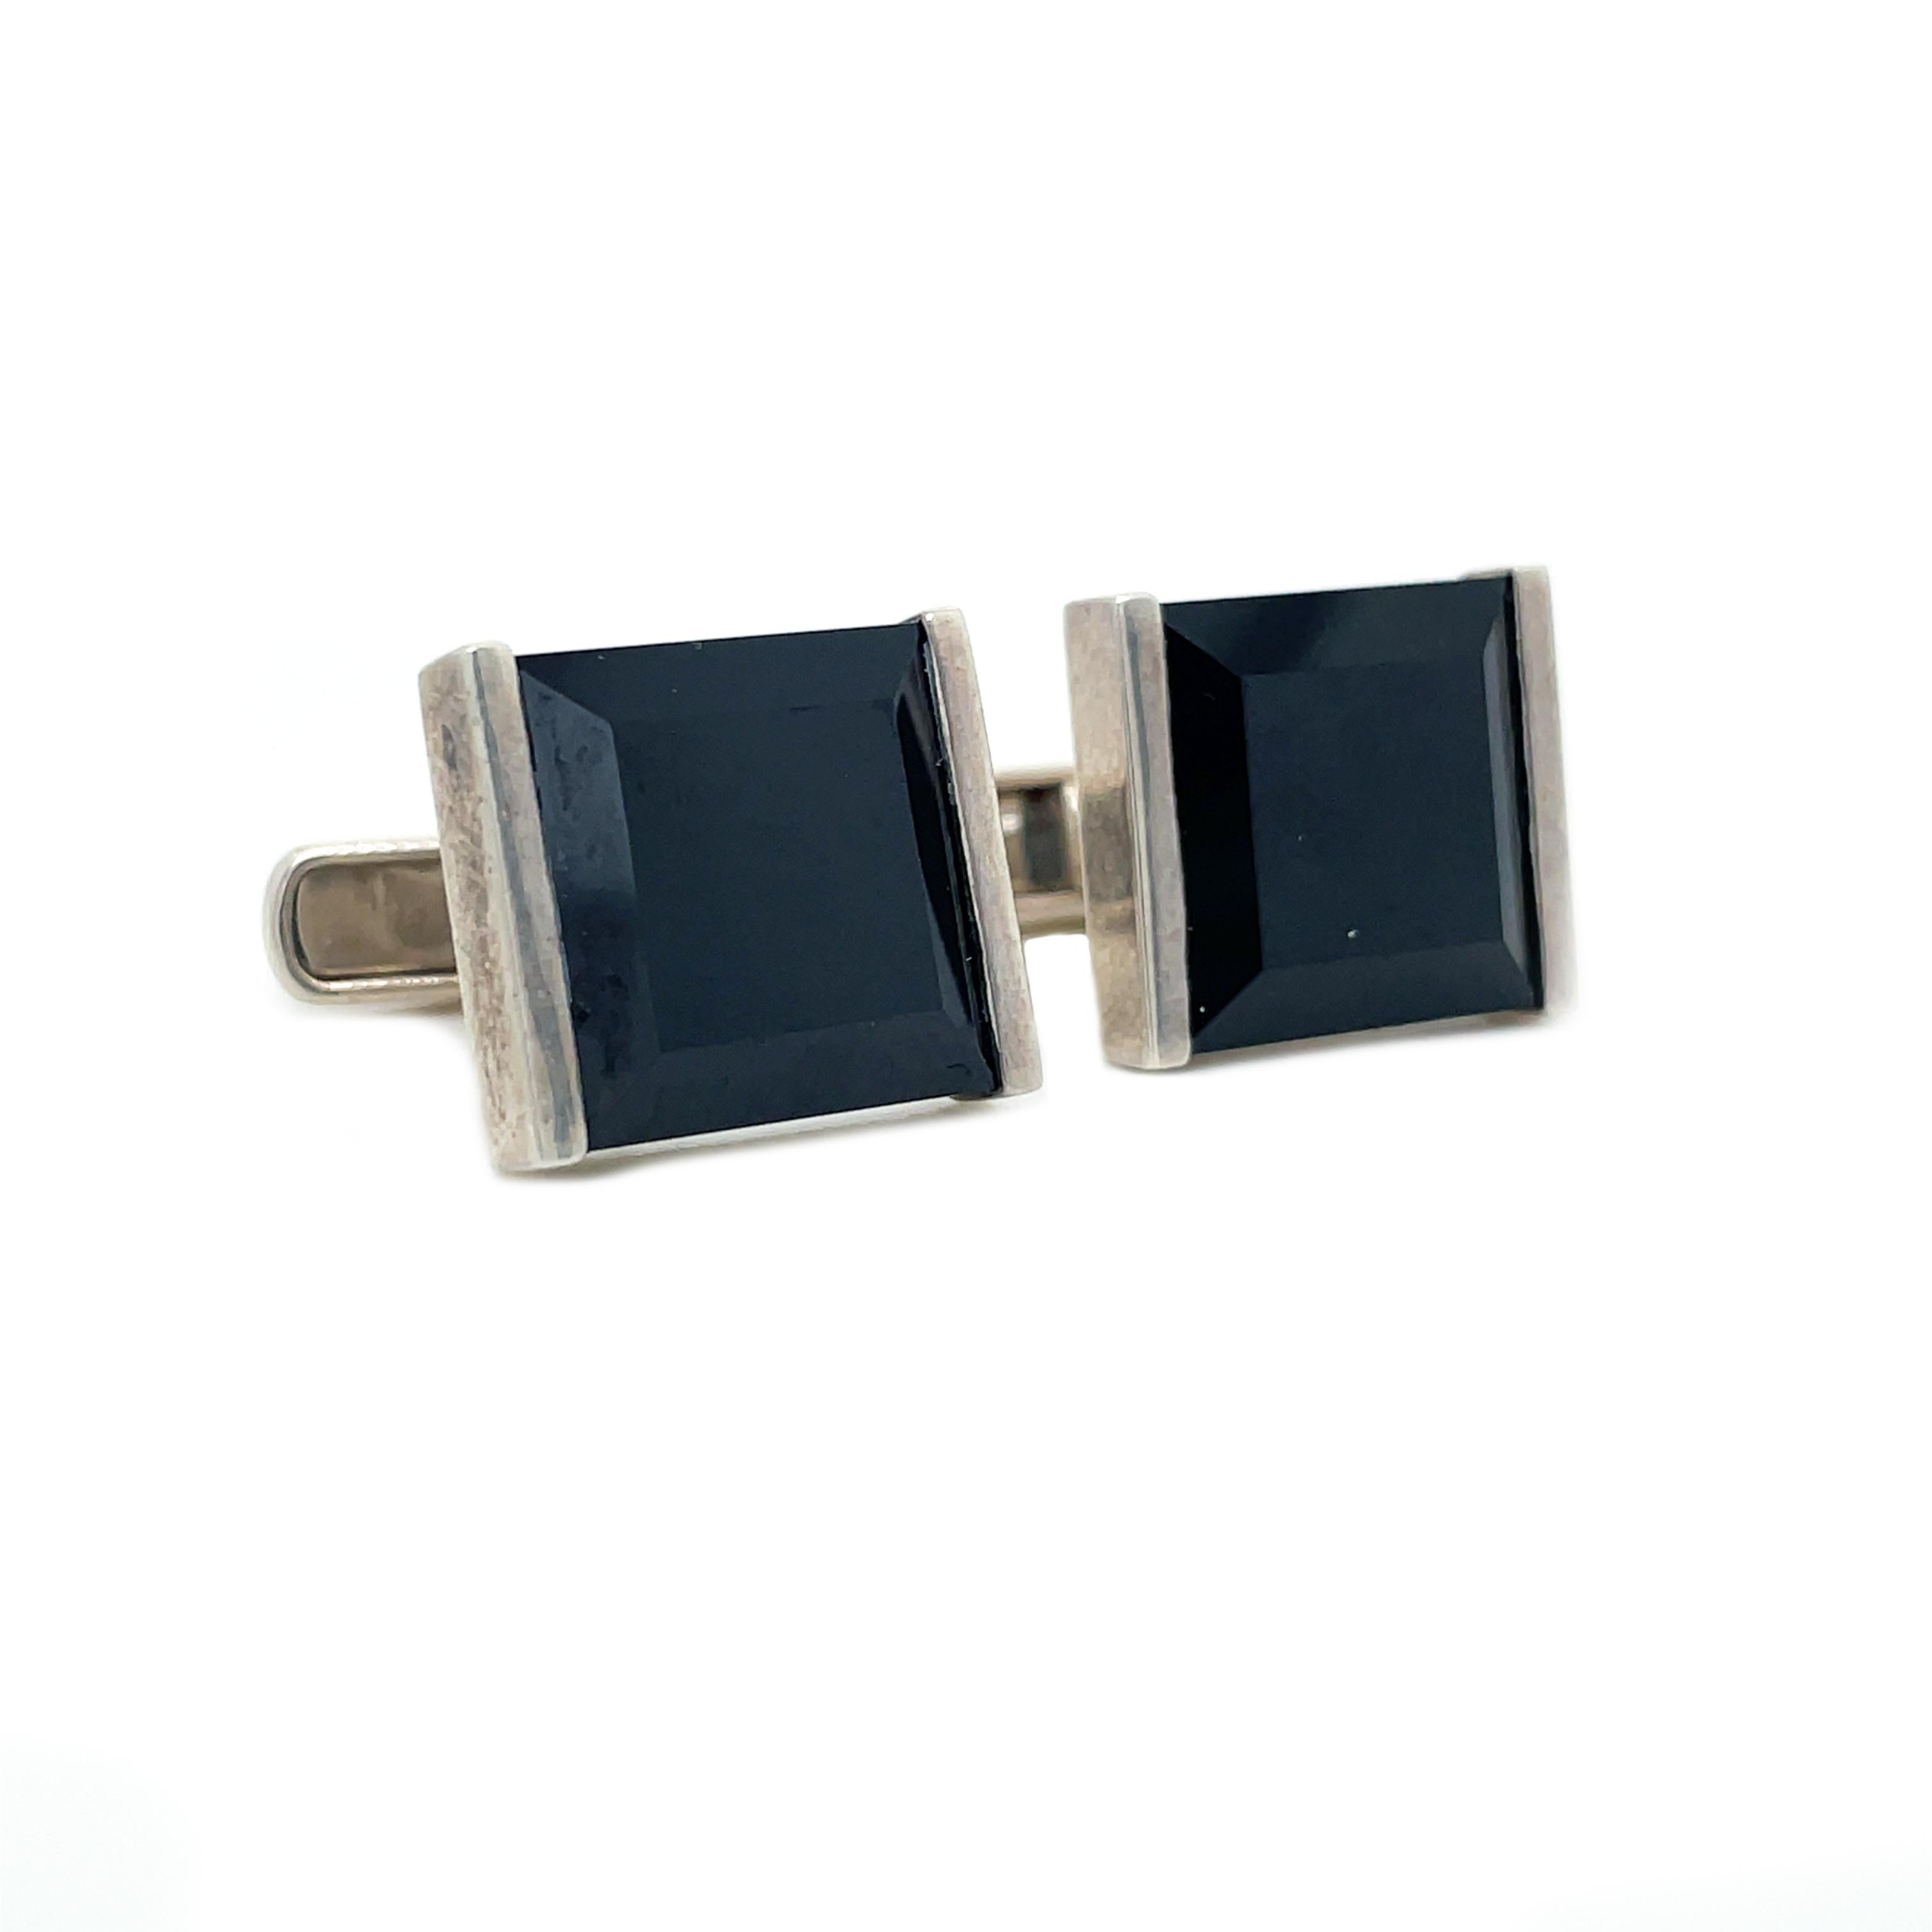 This is a killer set of sterling silver cufflinks that showcases a beautiful contrasting black onyx on the face! This is a timeless and classic pair of links that are essential to any gentleman's collection! This set of cufflinks would look